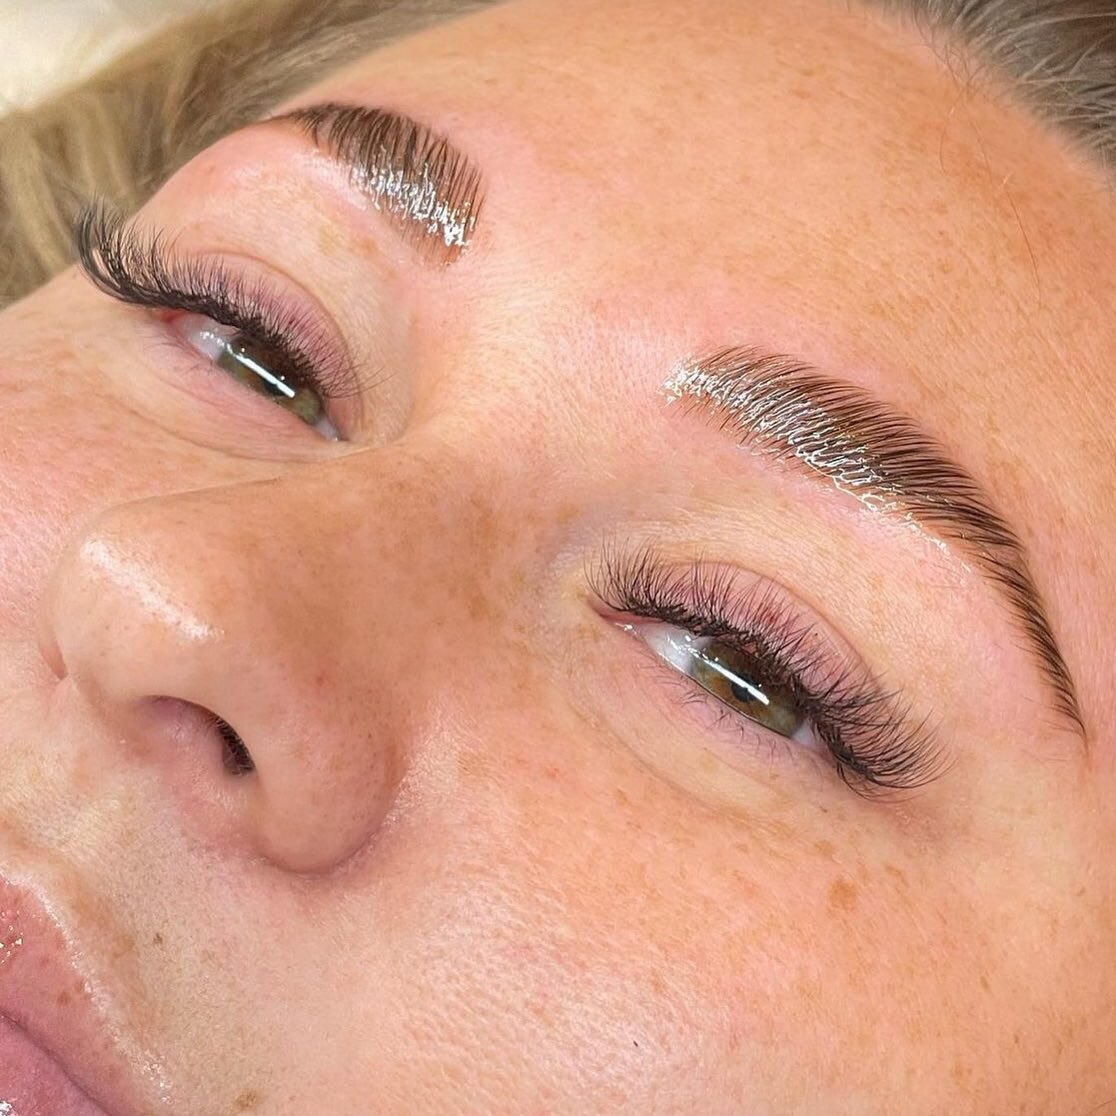 Brows &amp; Lashes go together like peanut butter and jelly 🥜🍇

Done by the wizard herself @em.yourestibestie 🪄

#brows #browlamination #browgoals #lashes #lashesextension #nkylashes #nkysalon #cincylashes #cleanbeauty